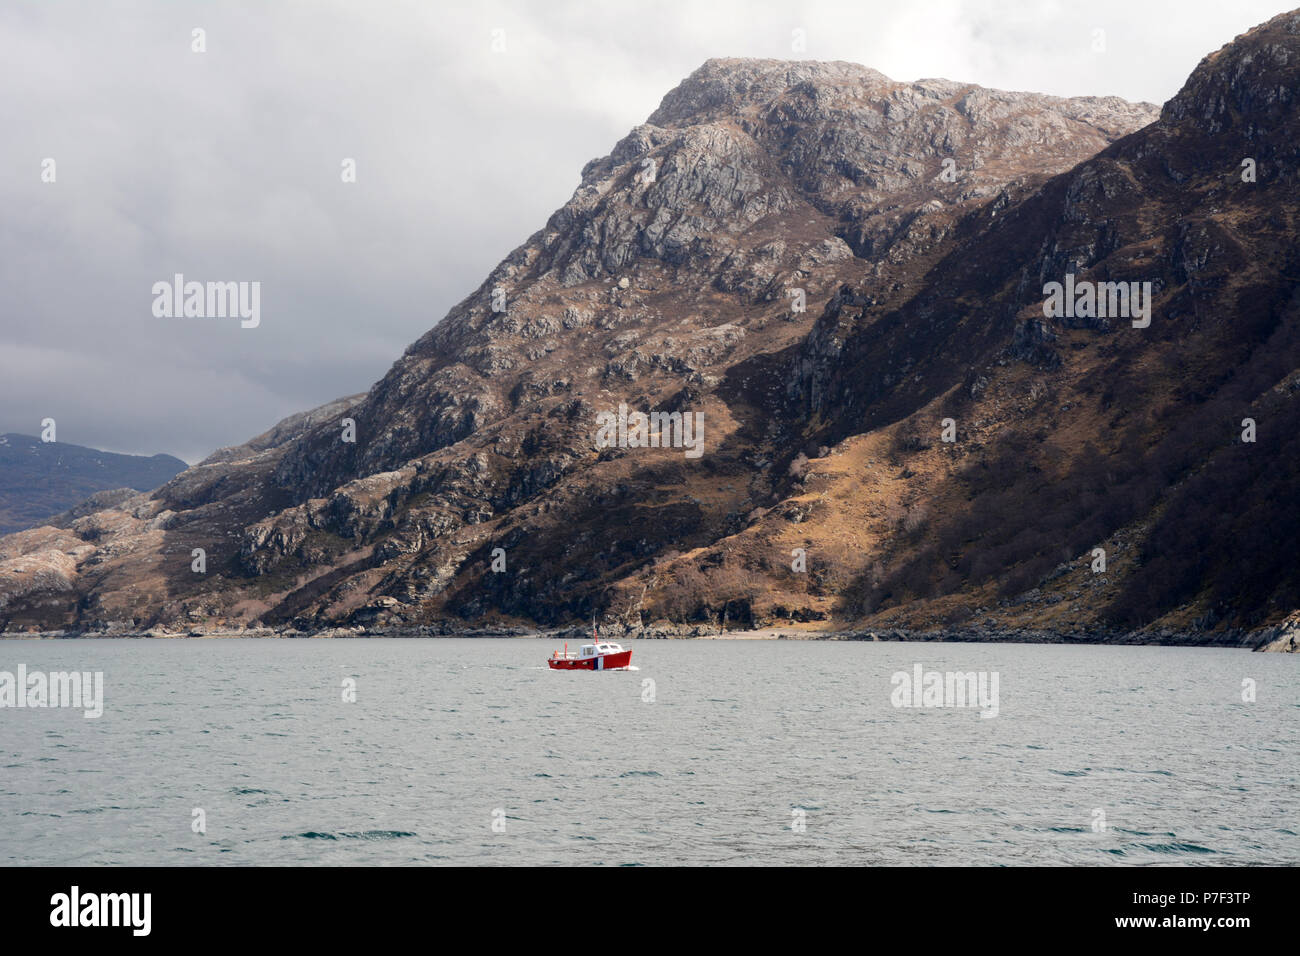 A boat beneath mountains in Loch Nevis off the coast of the Knoydart Peninsula, northwest Scottish Highlands, Scotland, Great Britain. Stock Photo